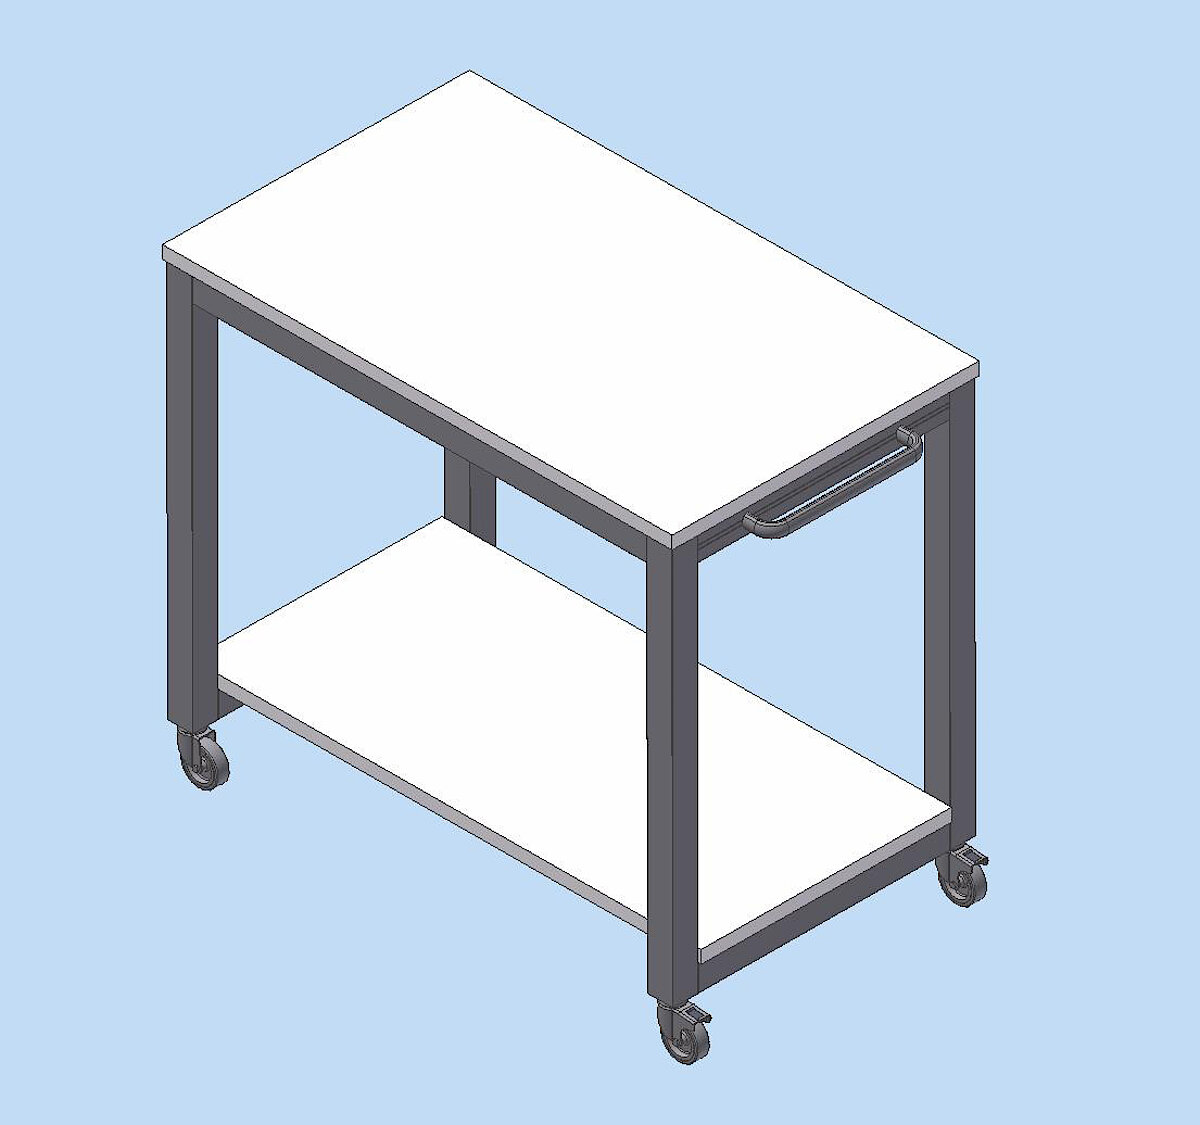 Cleanroom table trolley made of aluminum and melamine with castors